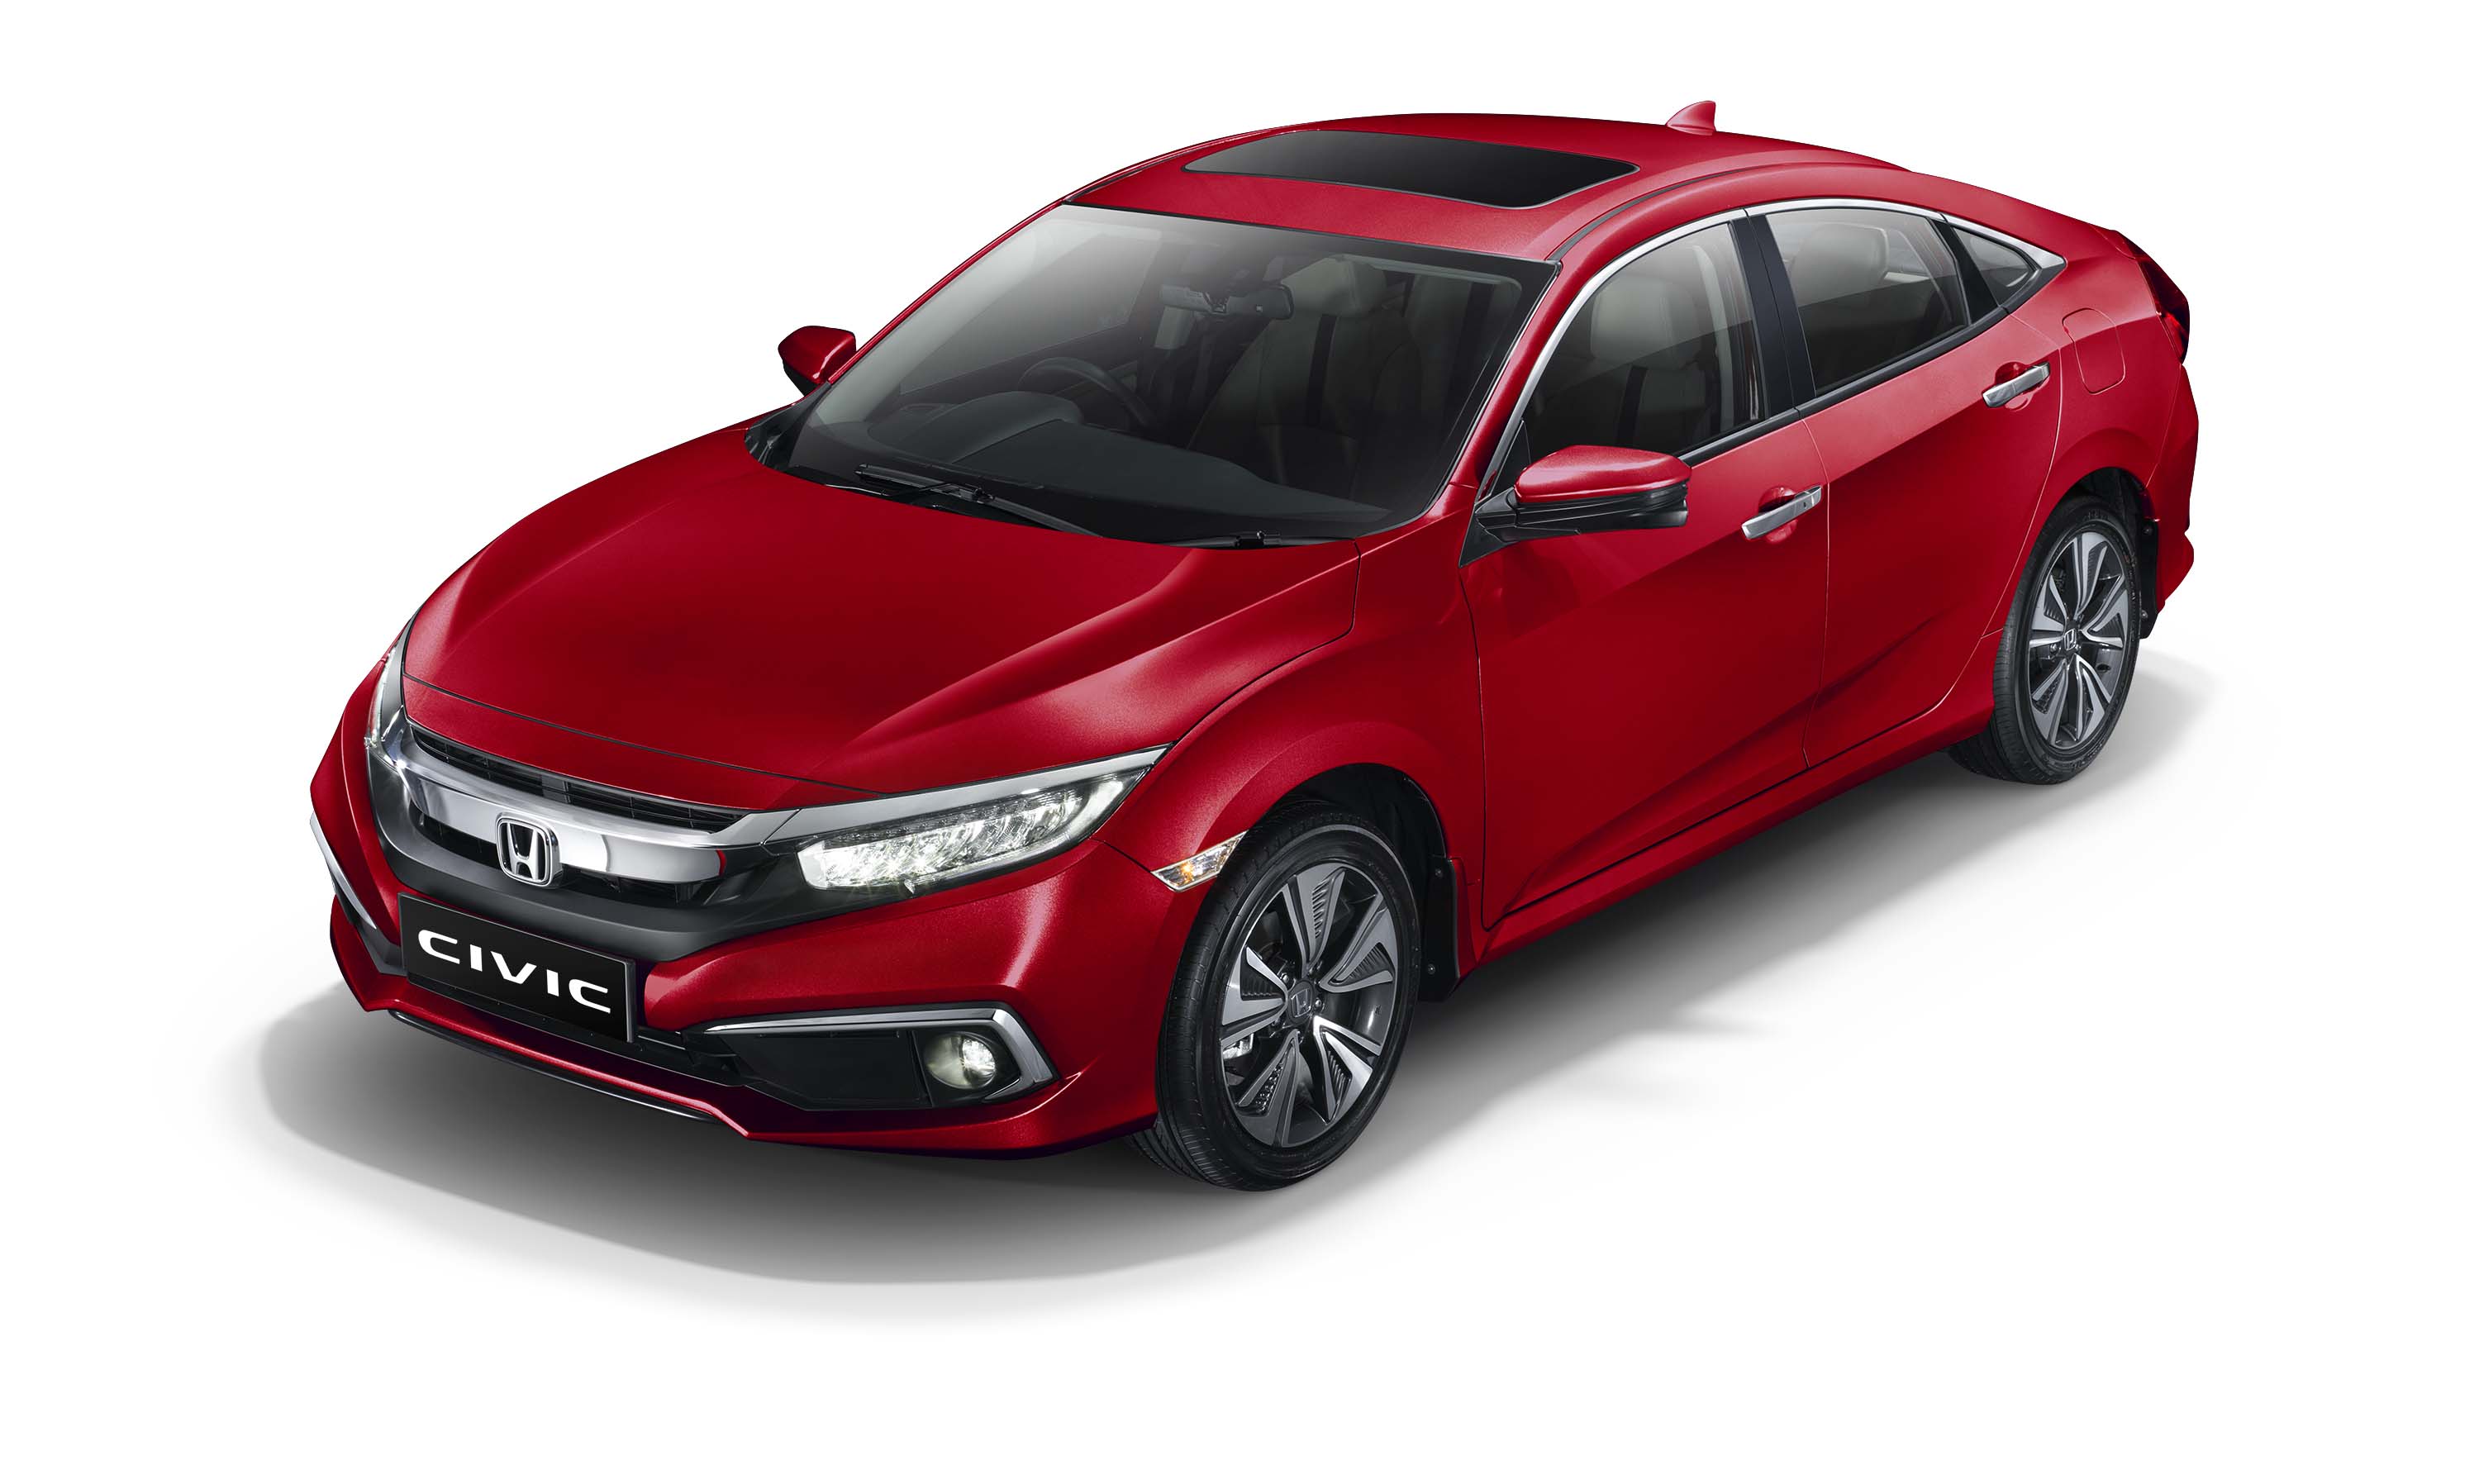 Honda Cars India Opens Prelaunch bookings for much awaited All New